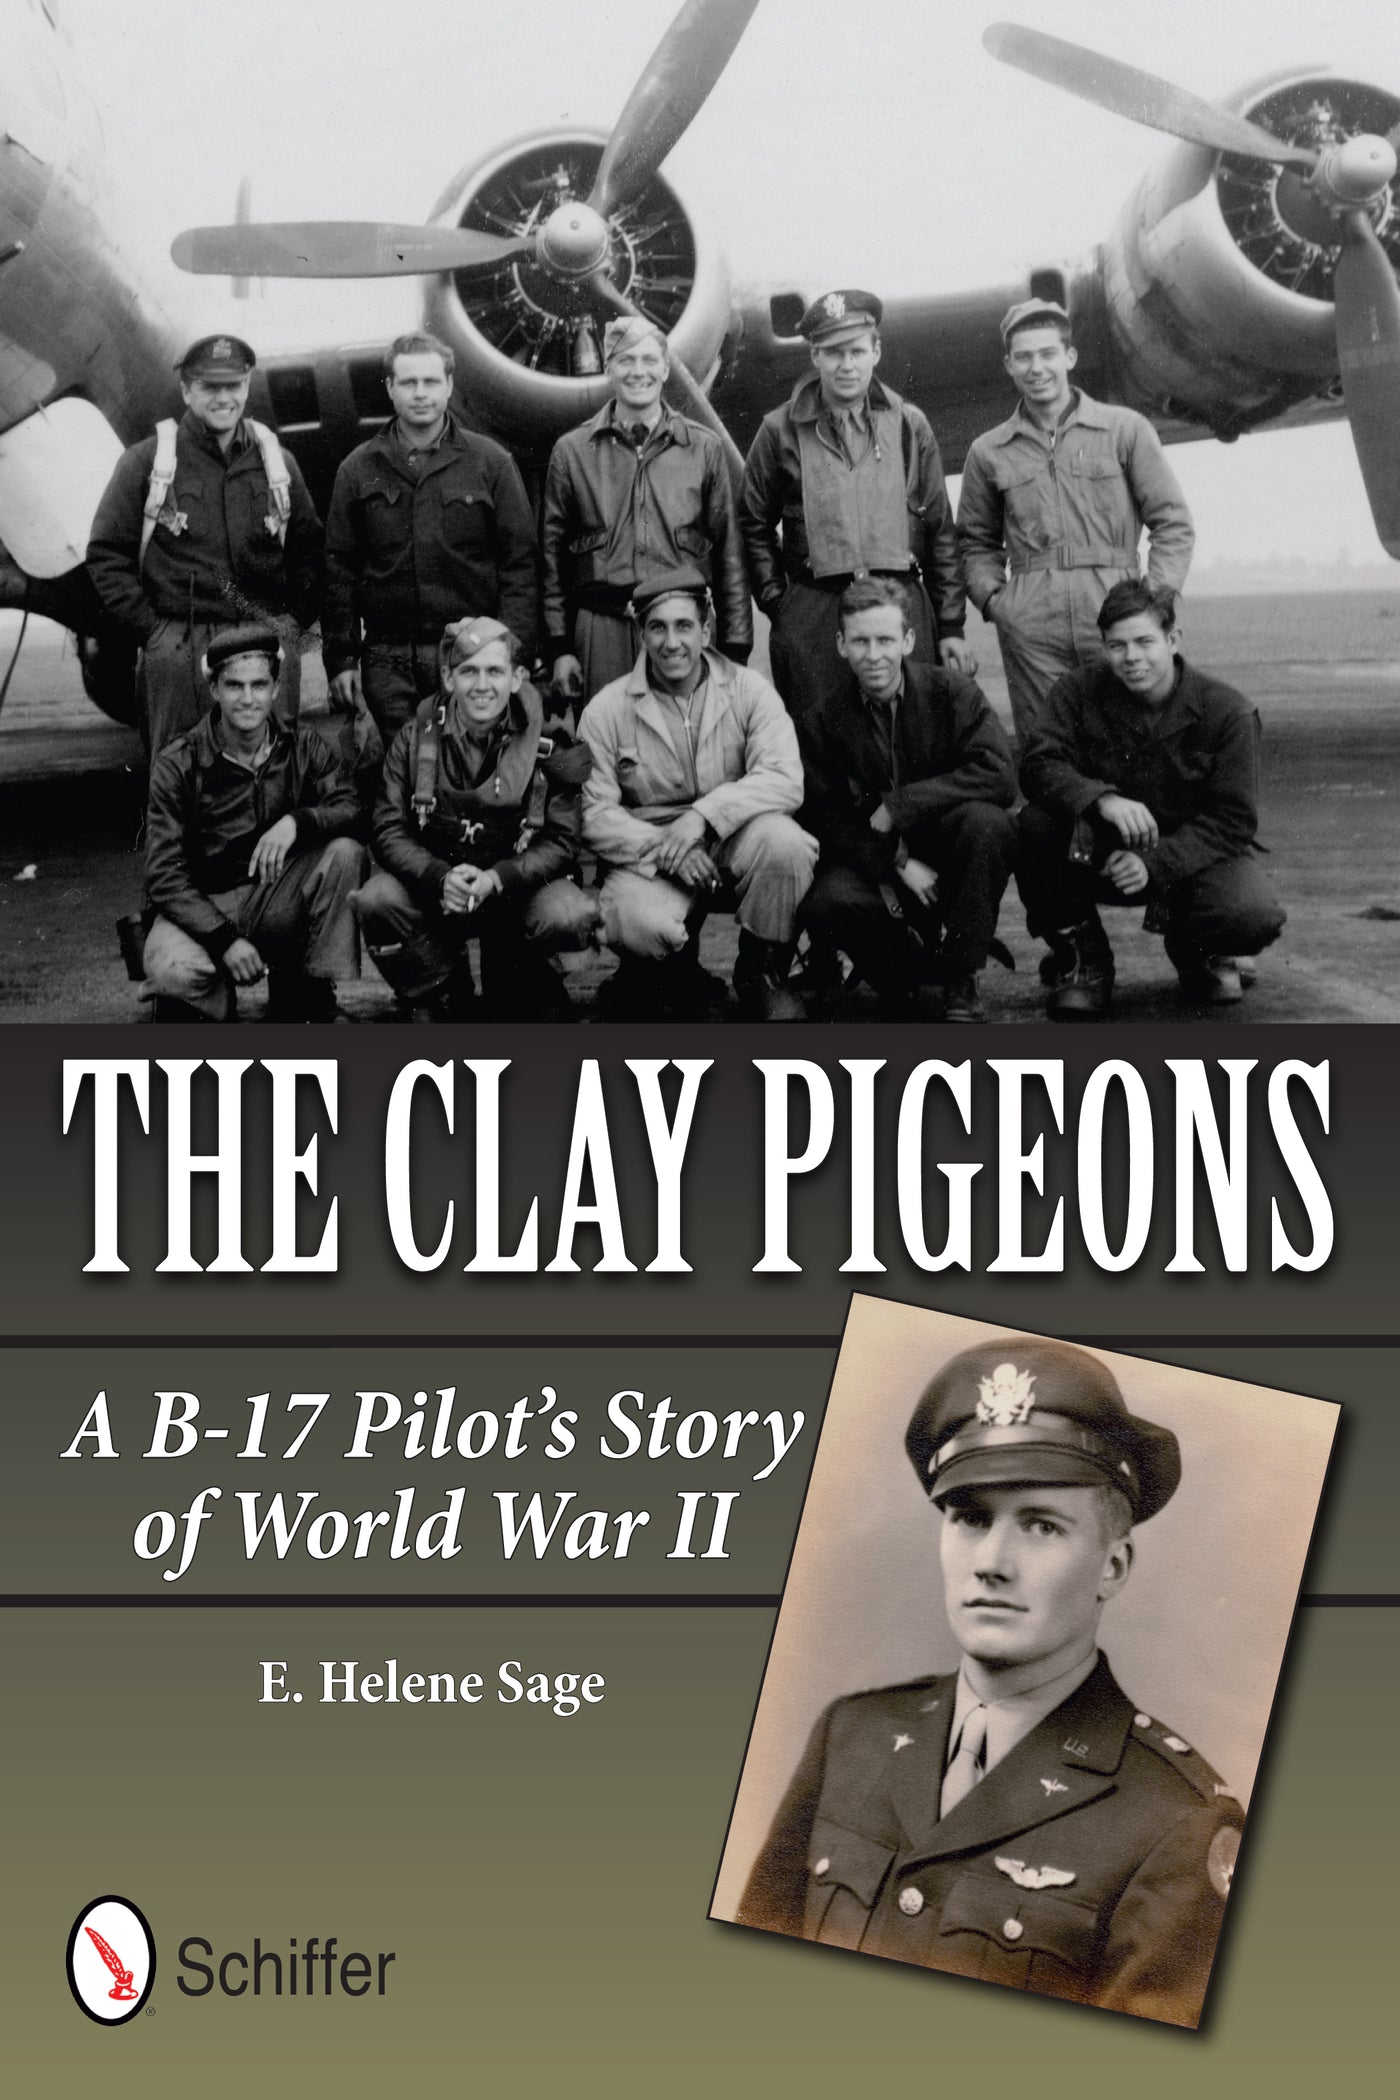 The Clay Pigeons